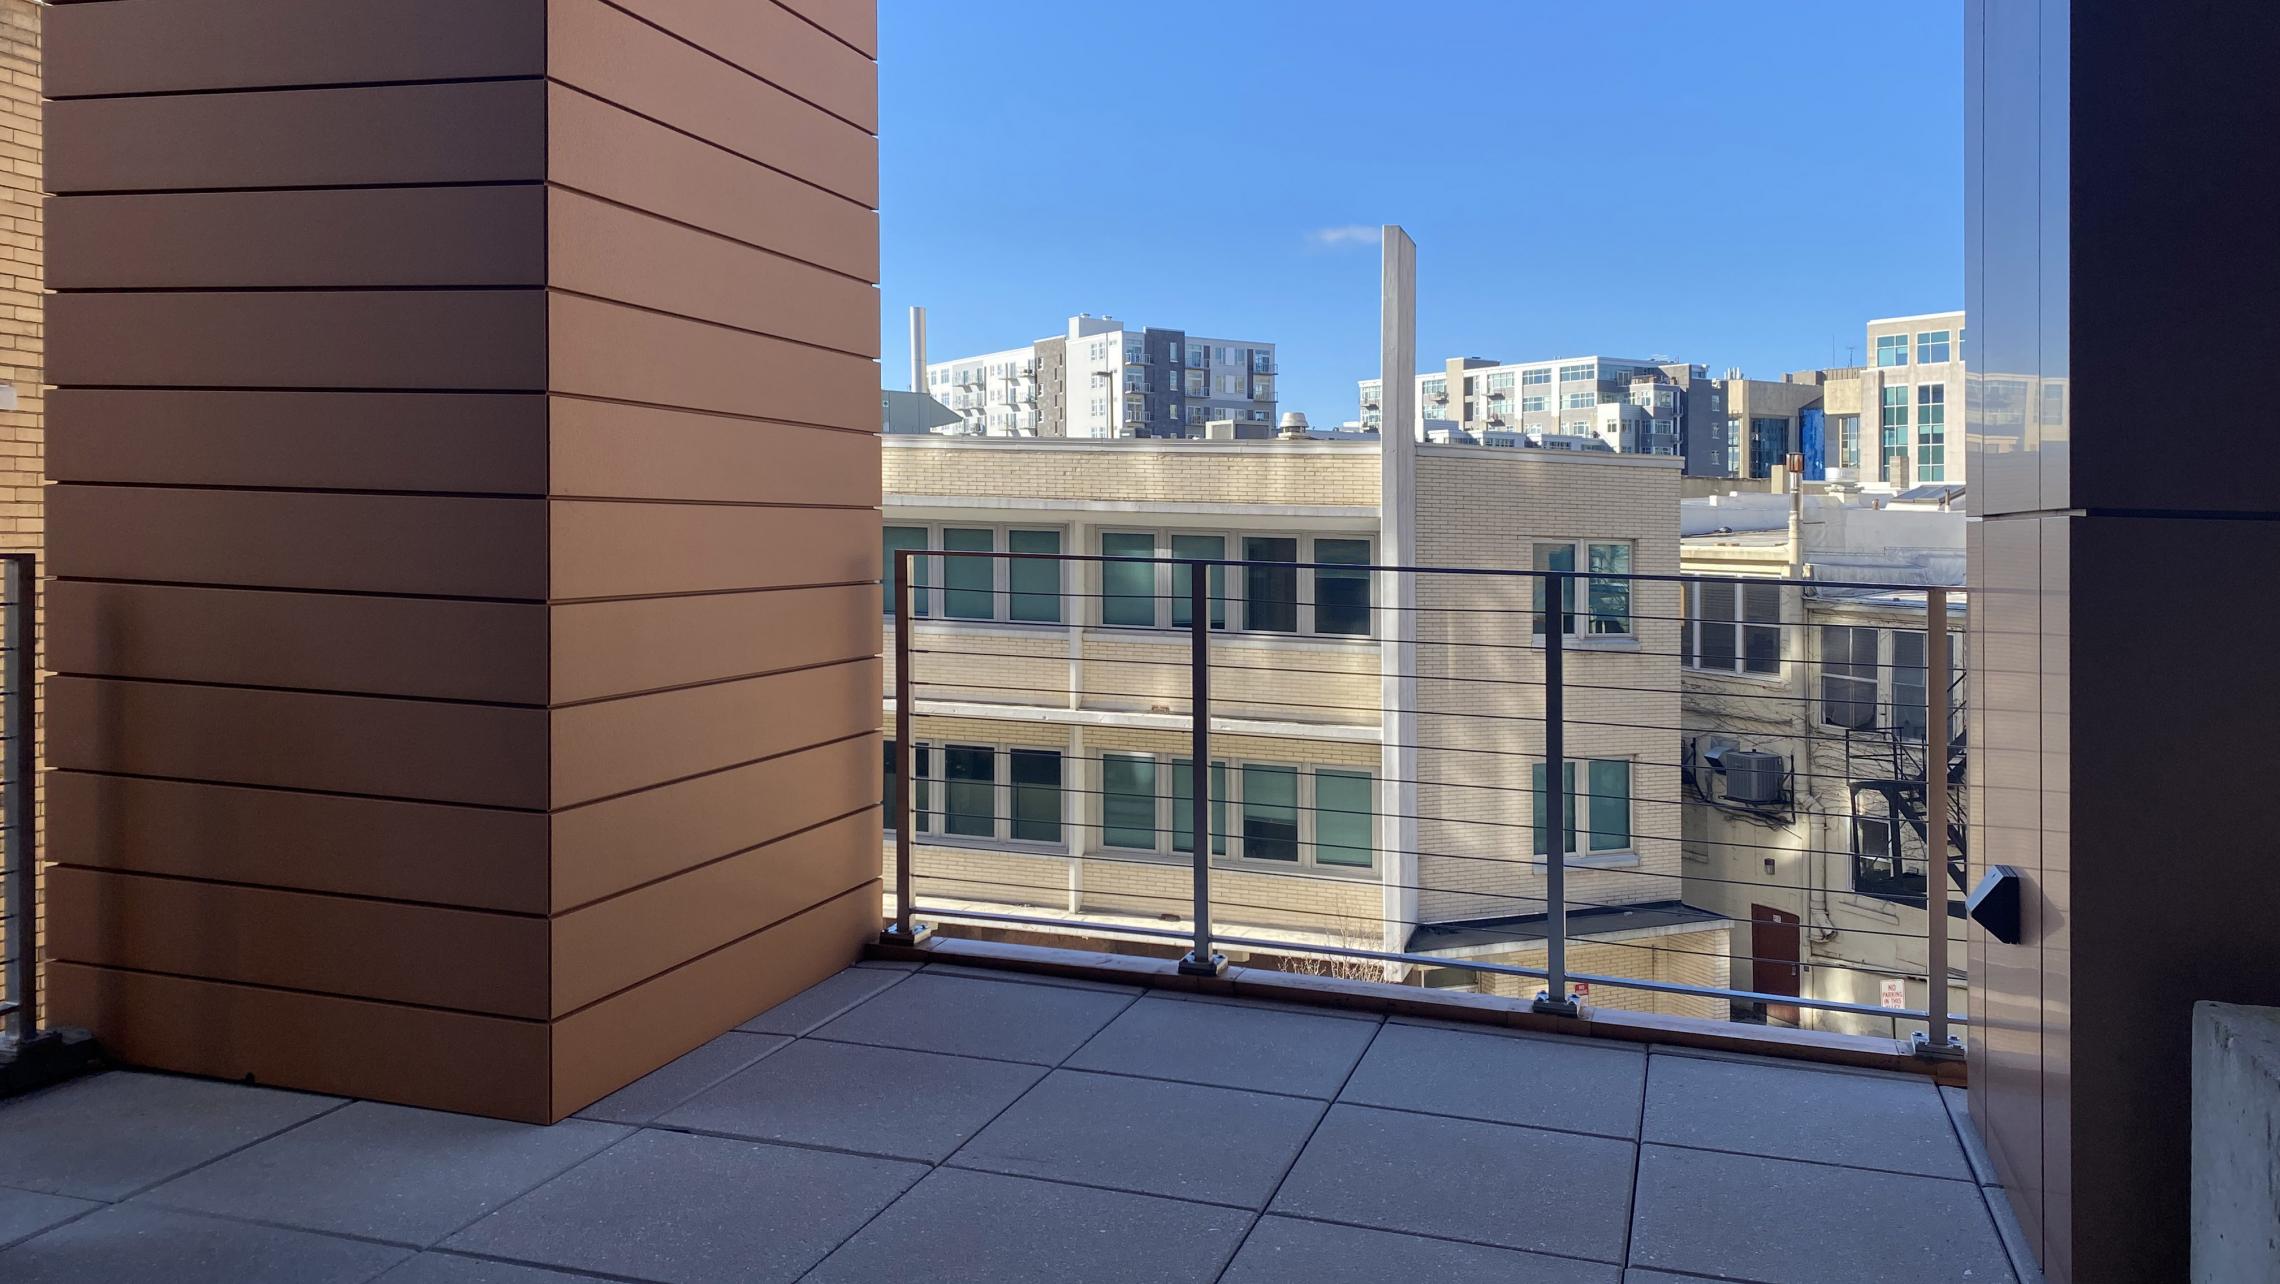 The-Pressman-Apartment-312-Two-Bedroom-One-Bath-ADA-Upscale-Luxurious-Modern-Exposed-Duct-Concrete-Capitol-Square-Downtown-Madison-Balcony-Terrace-Pets-Fitness-Lounge-Grill-Lifestyle